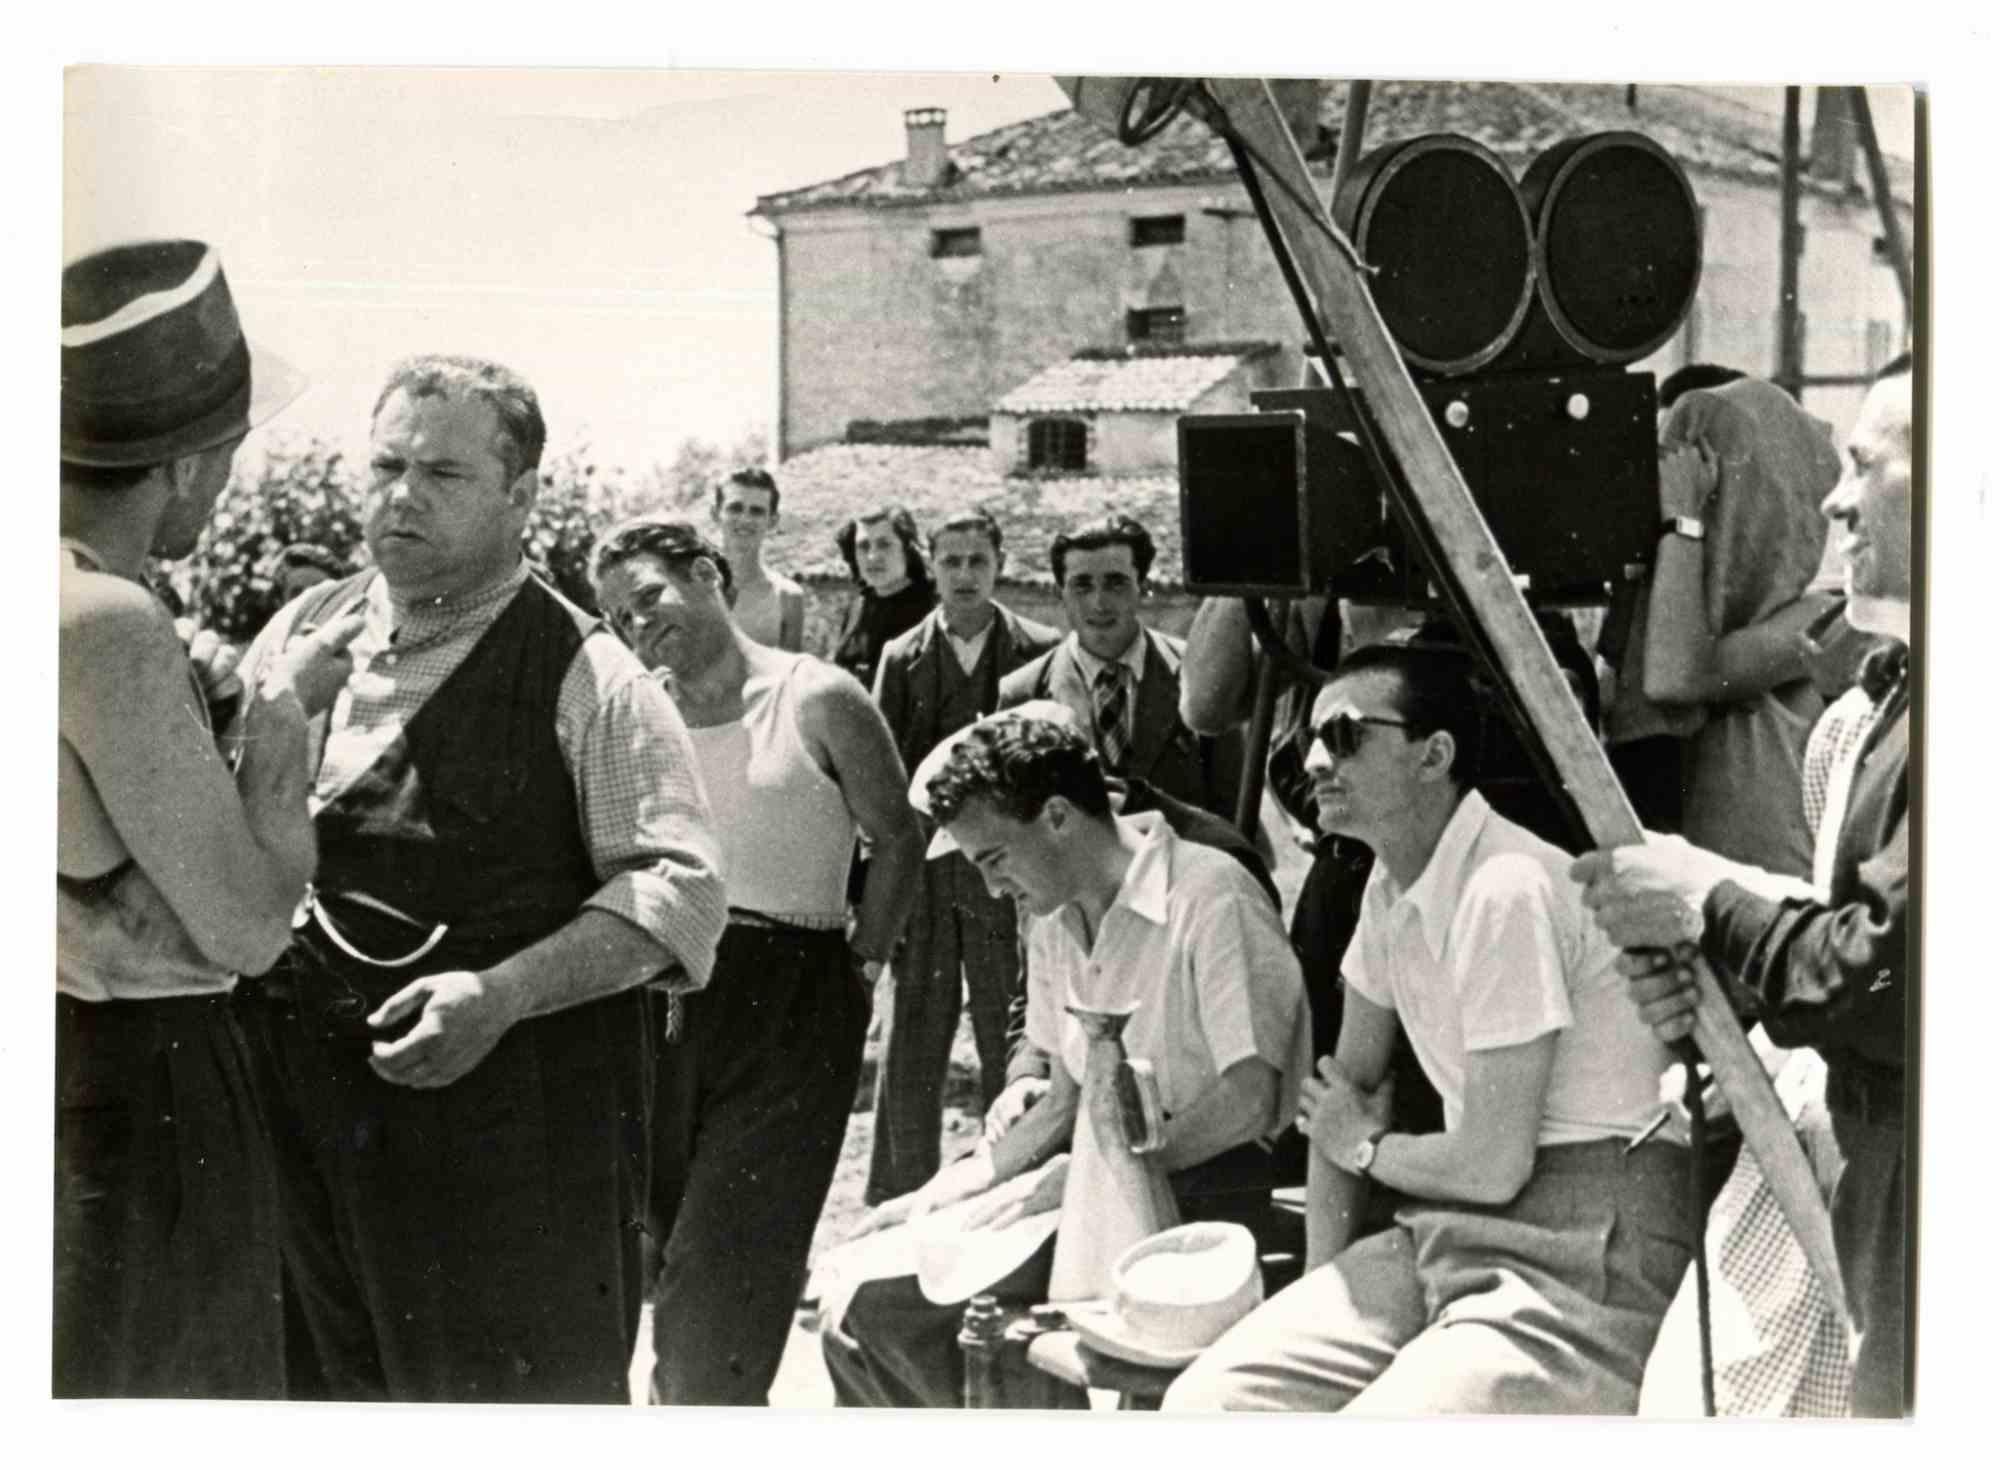 Unknown Figurative Photograph - Luchino Visconti on the Set of the Film Ossessione - Vintage Photo - 1943